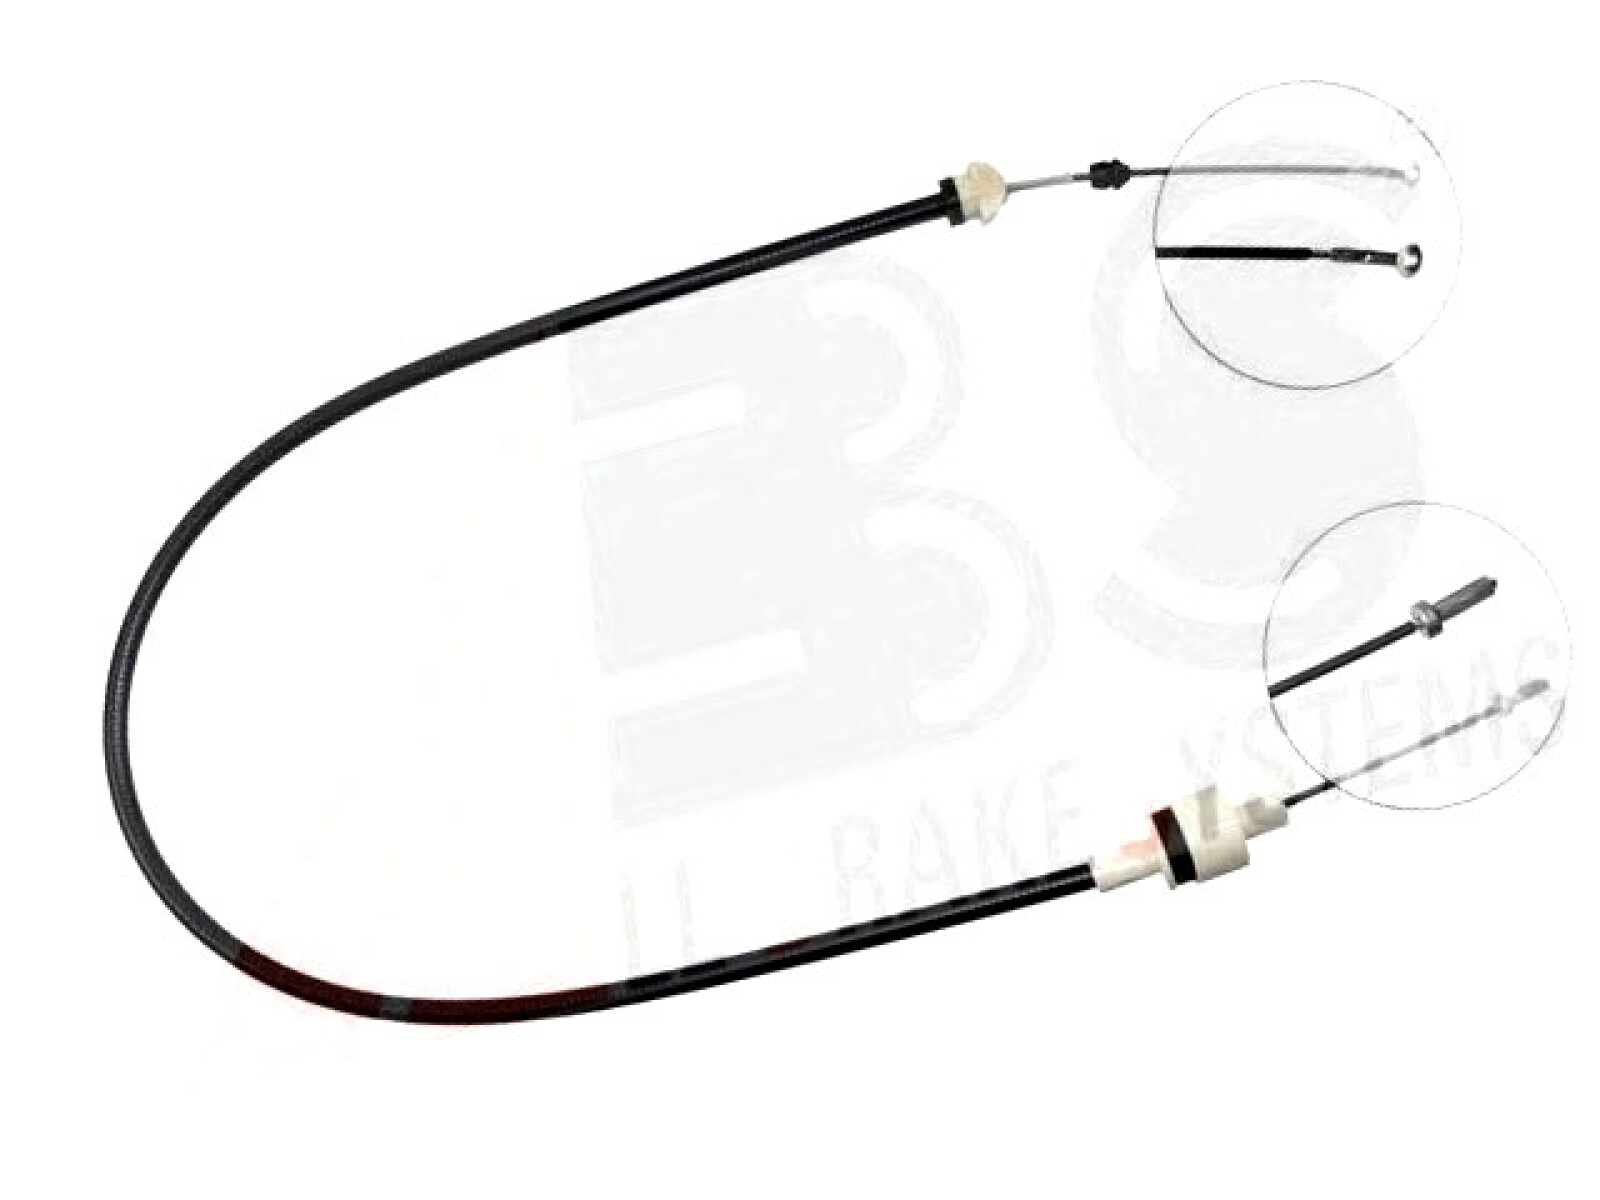 CABLE EMBRAGUE FORD ESCORT 1.6 AE CHT 83/92 81AB.7K553 (FE313A) - 